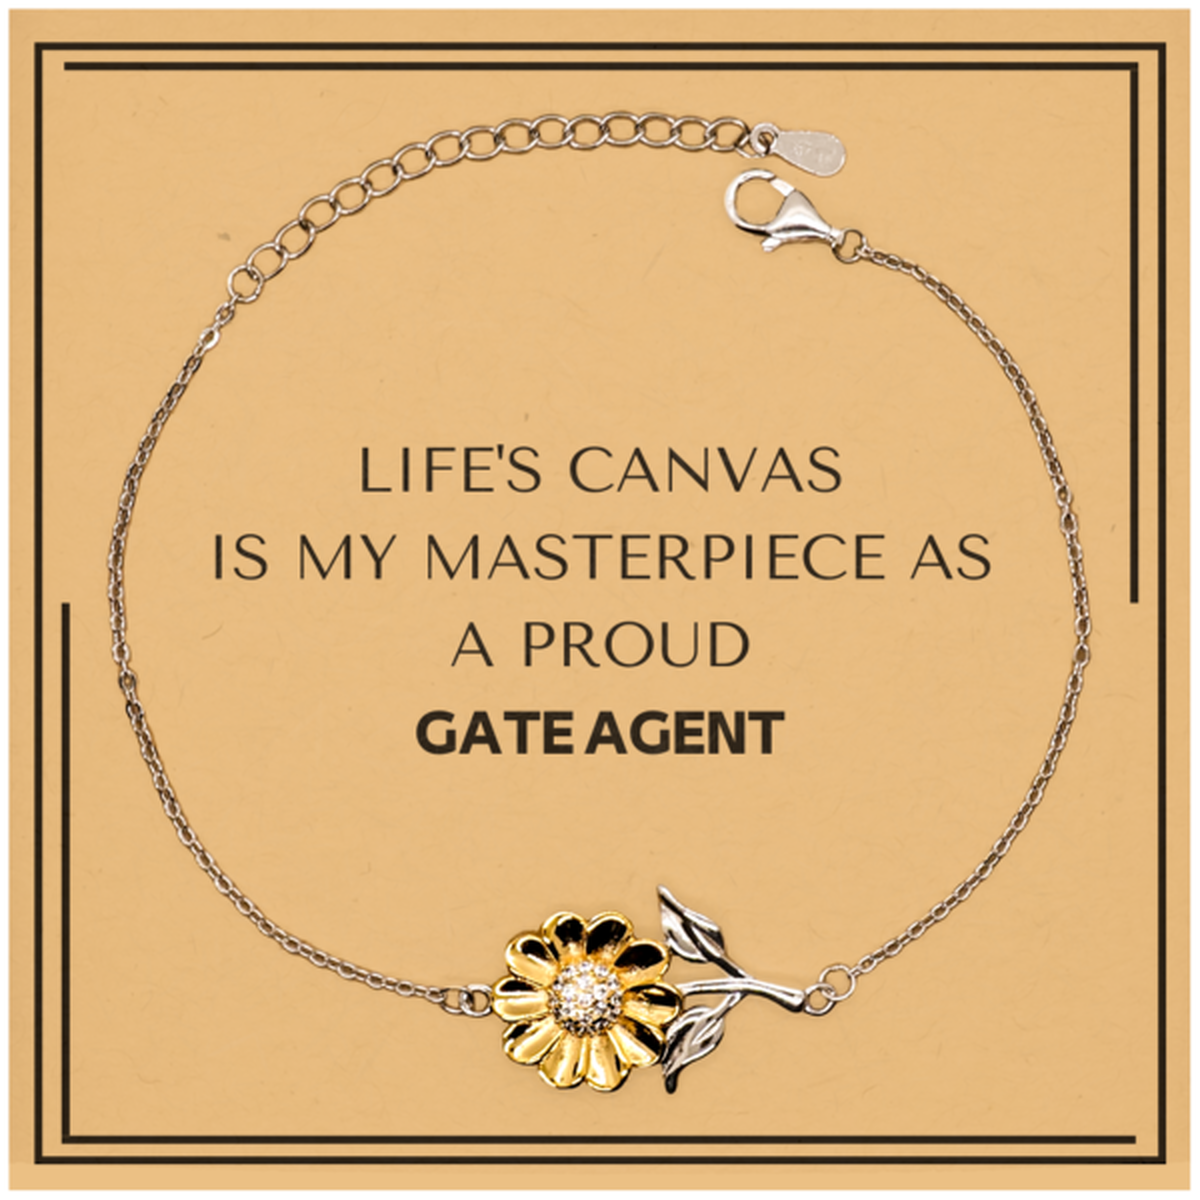 Proud Gate Agent Gifts, Life's canvas is my masterpiece, Epic Birthday Christmas Unique Sunflower Bracelet For Gate Agent, Coworkers, Men, Women, Friends